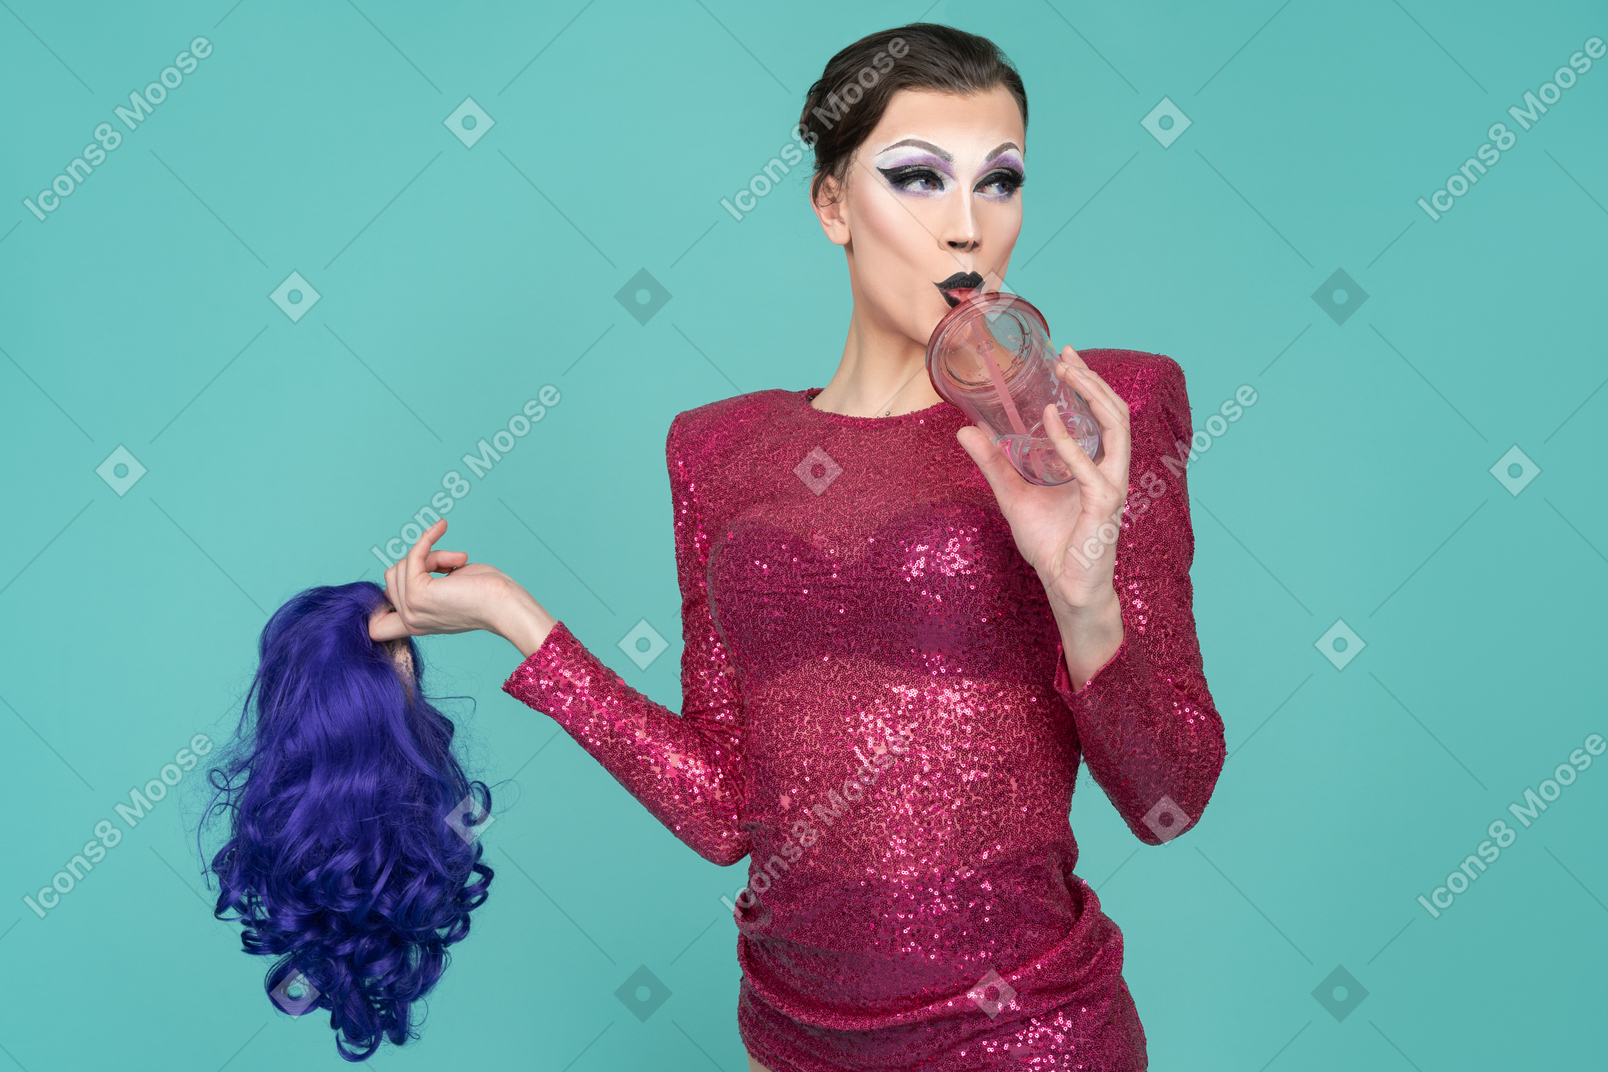 Close-up of a drag queen in pink dress drinking through straw & holding wig